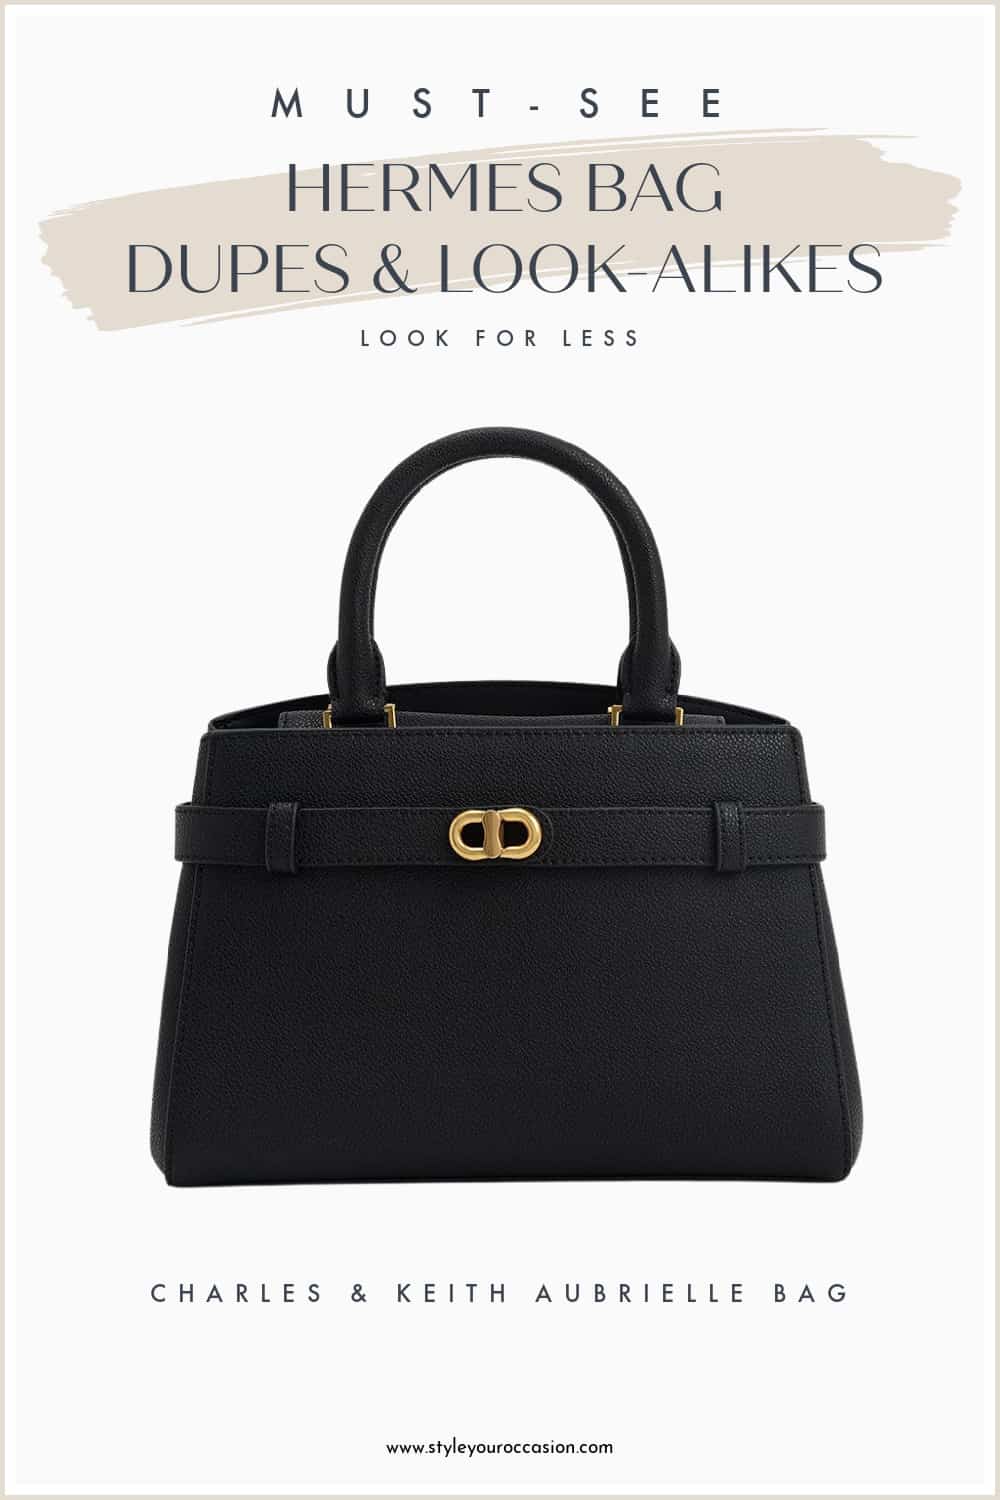 an image board of a black and gold satchel Hermes bag dupe from Charles and Keith